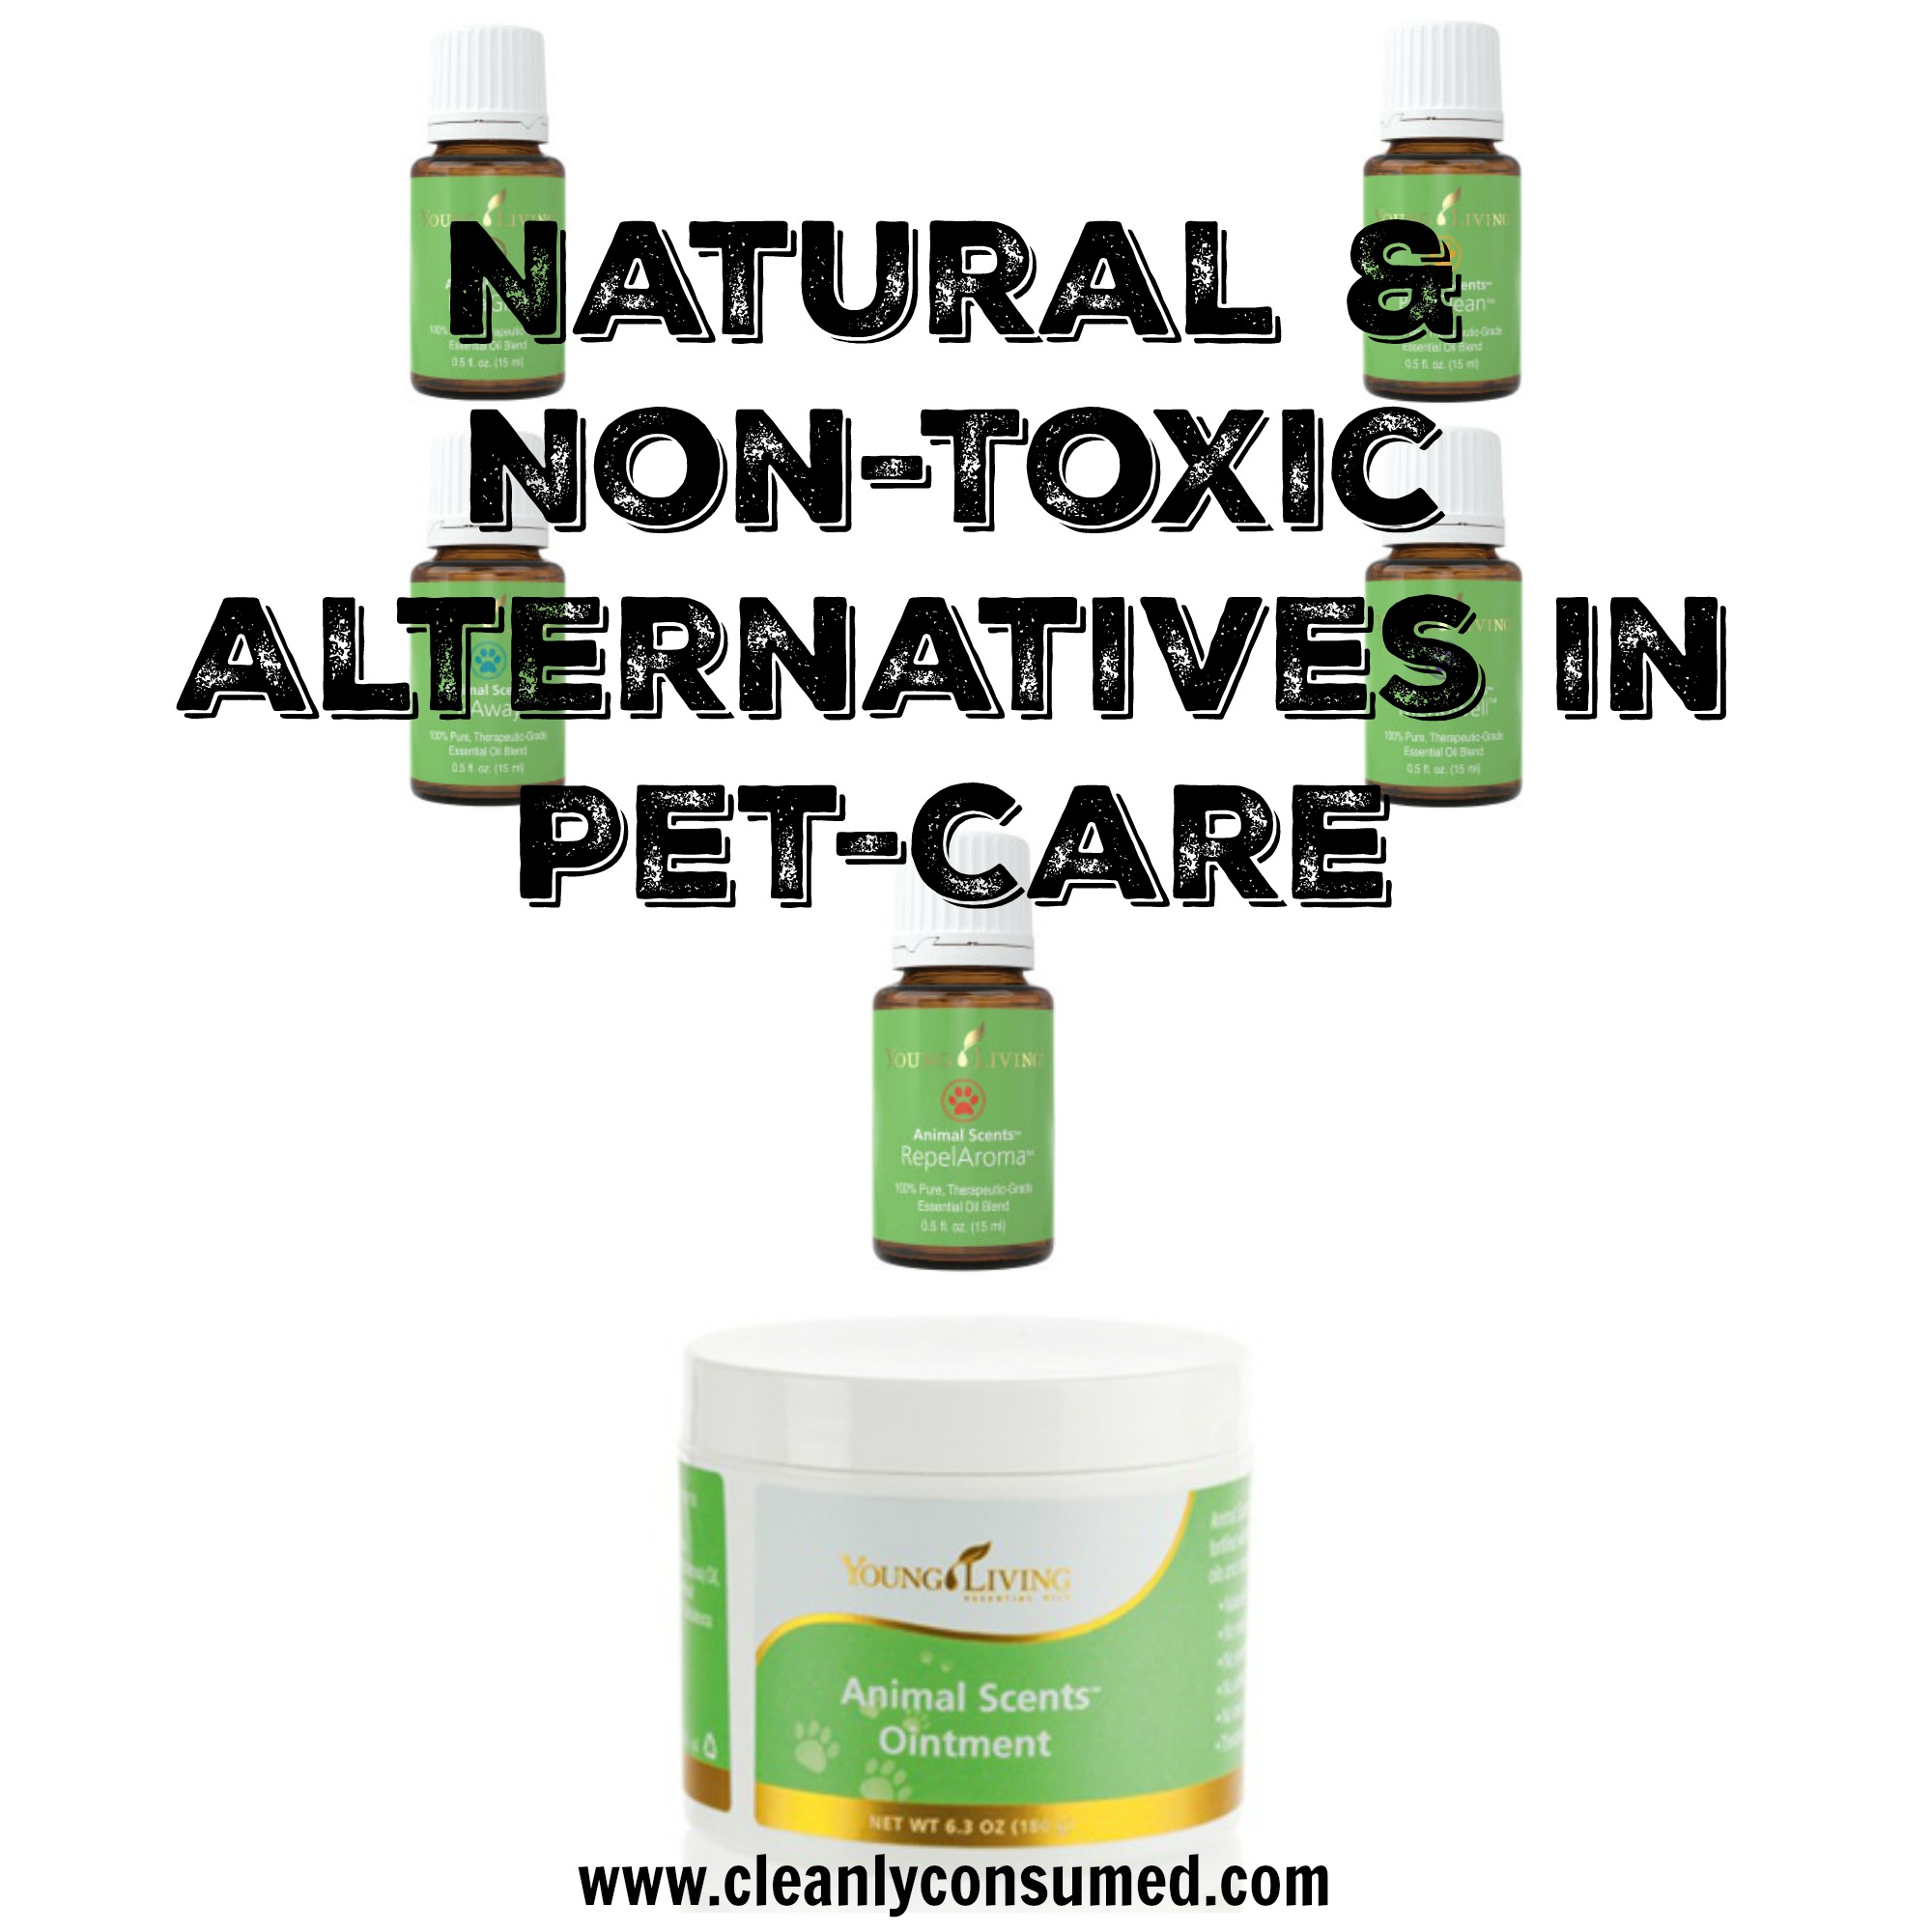 Natural Pet Care Products and Essential Oils